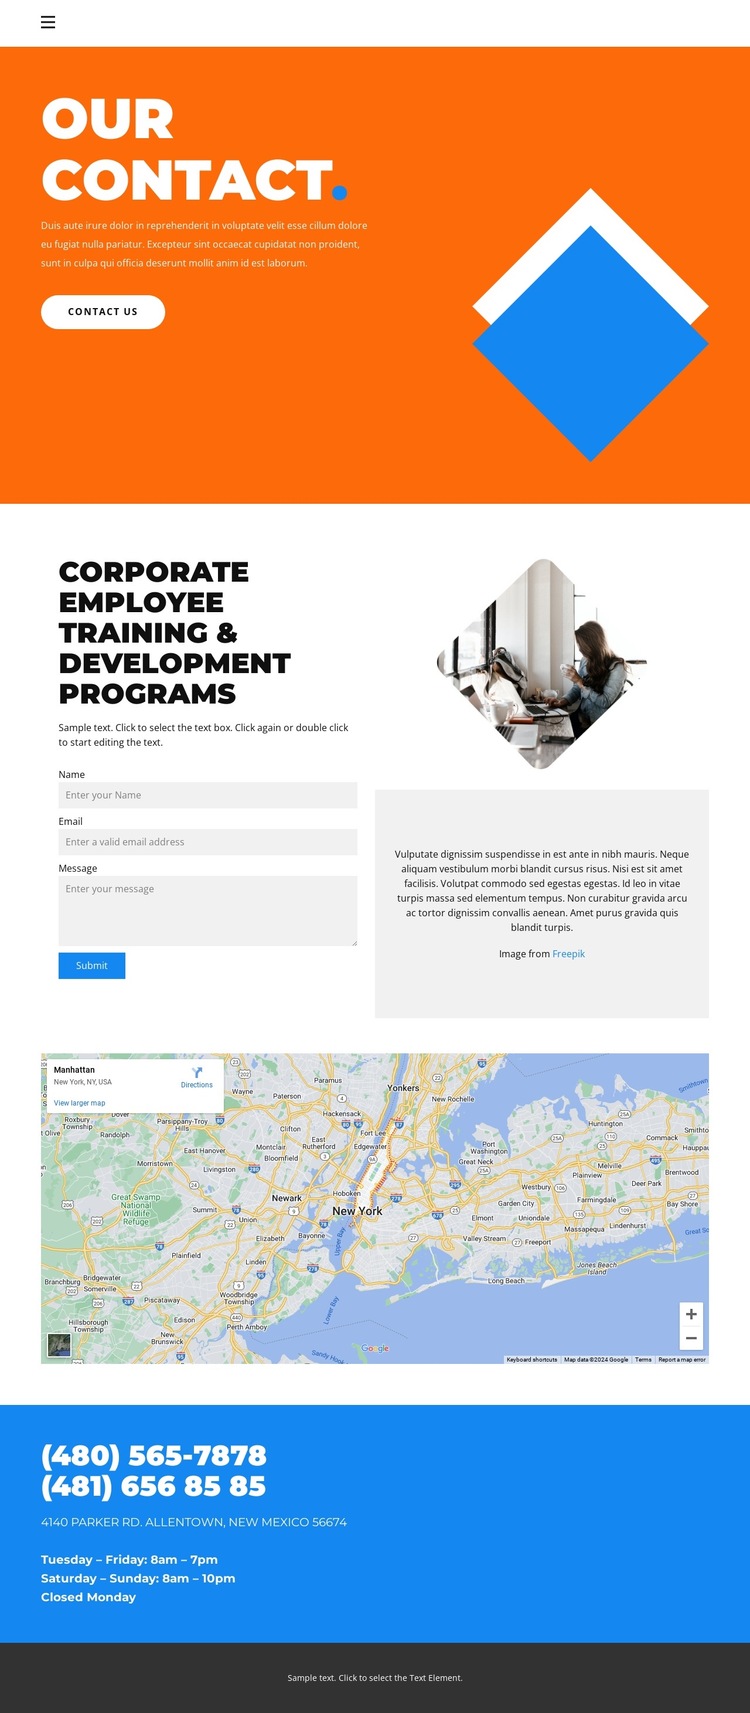 Design agency contacts HTML5 Template